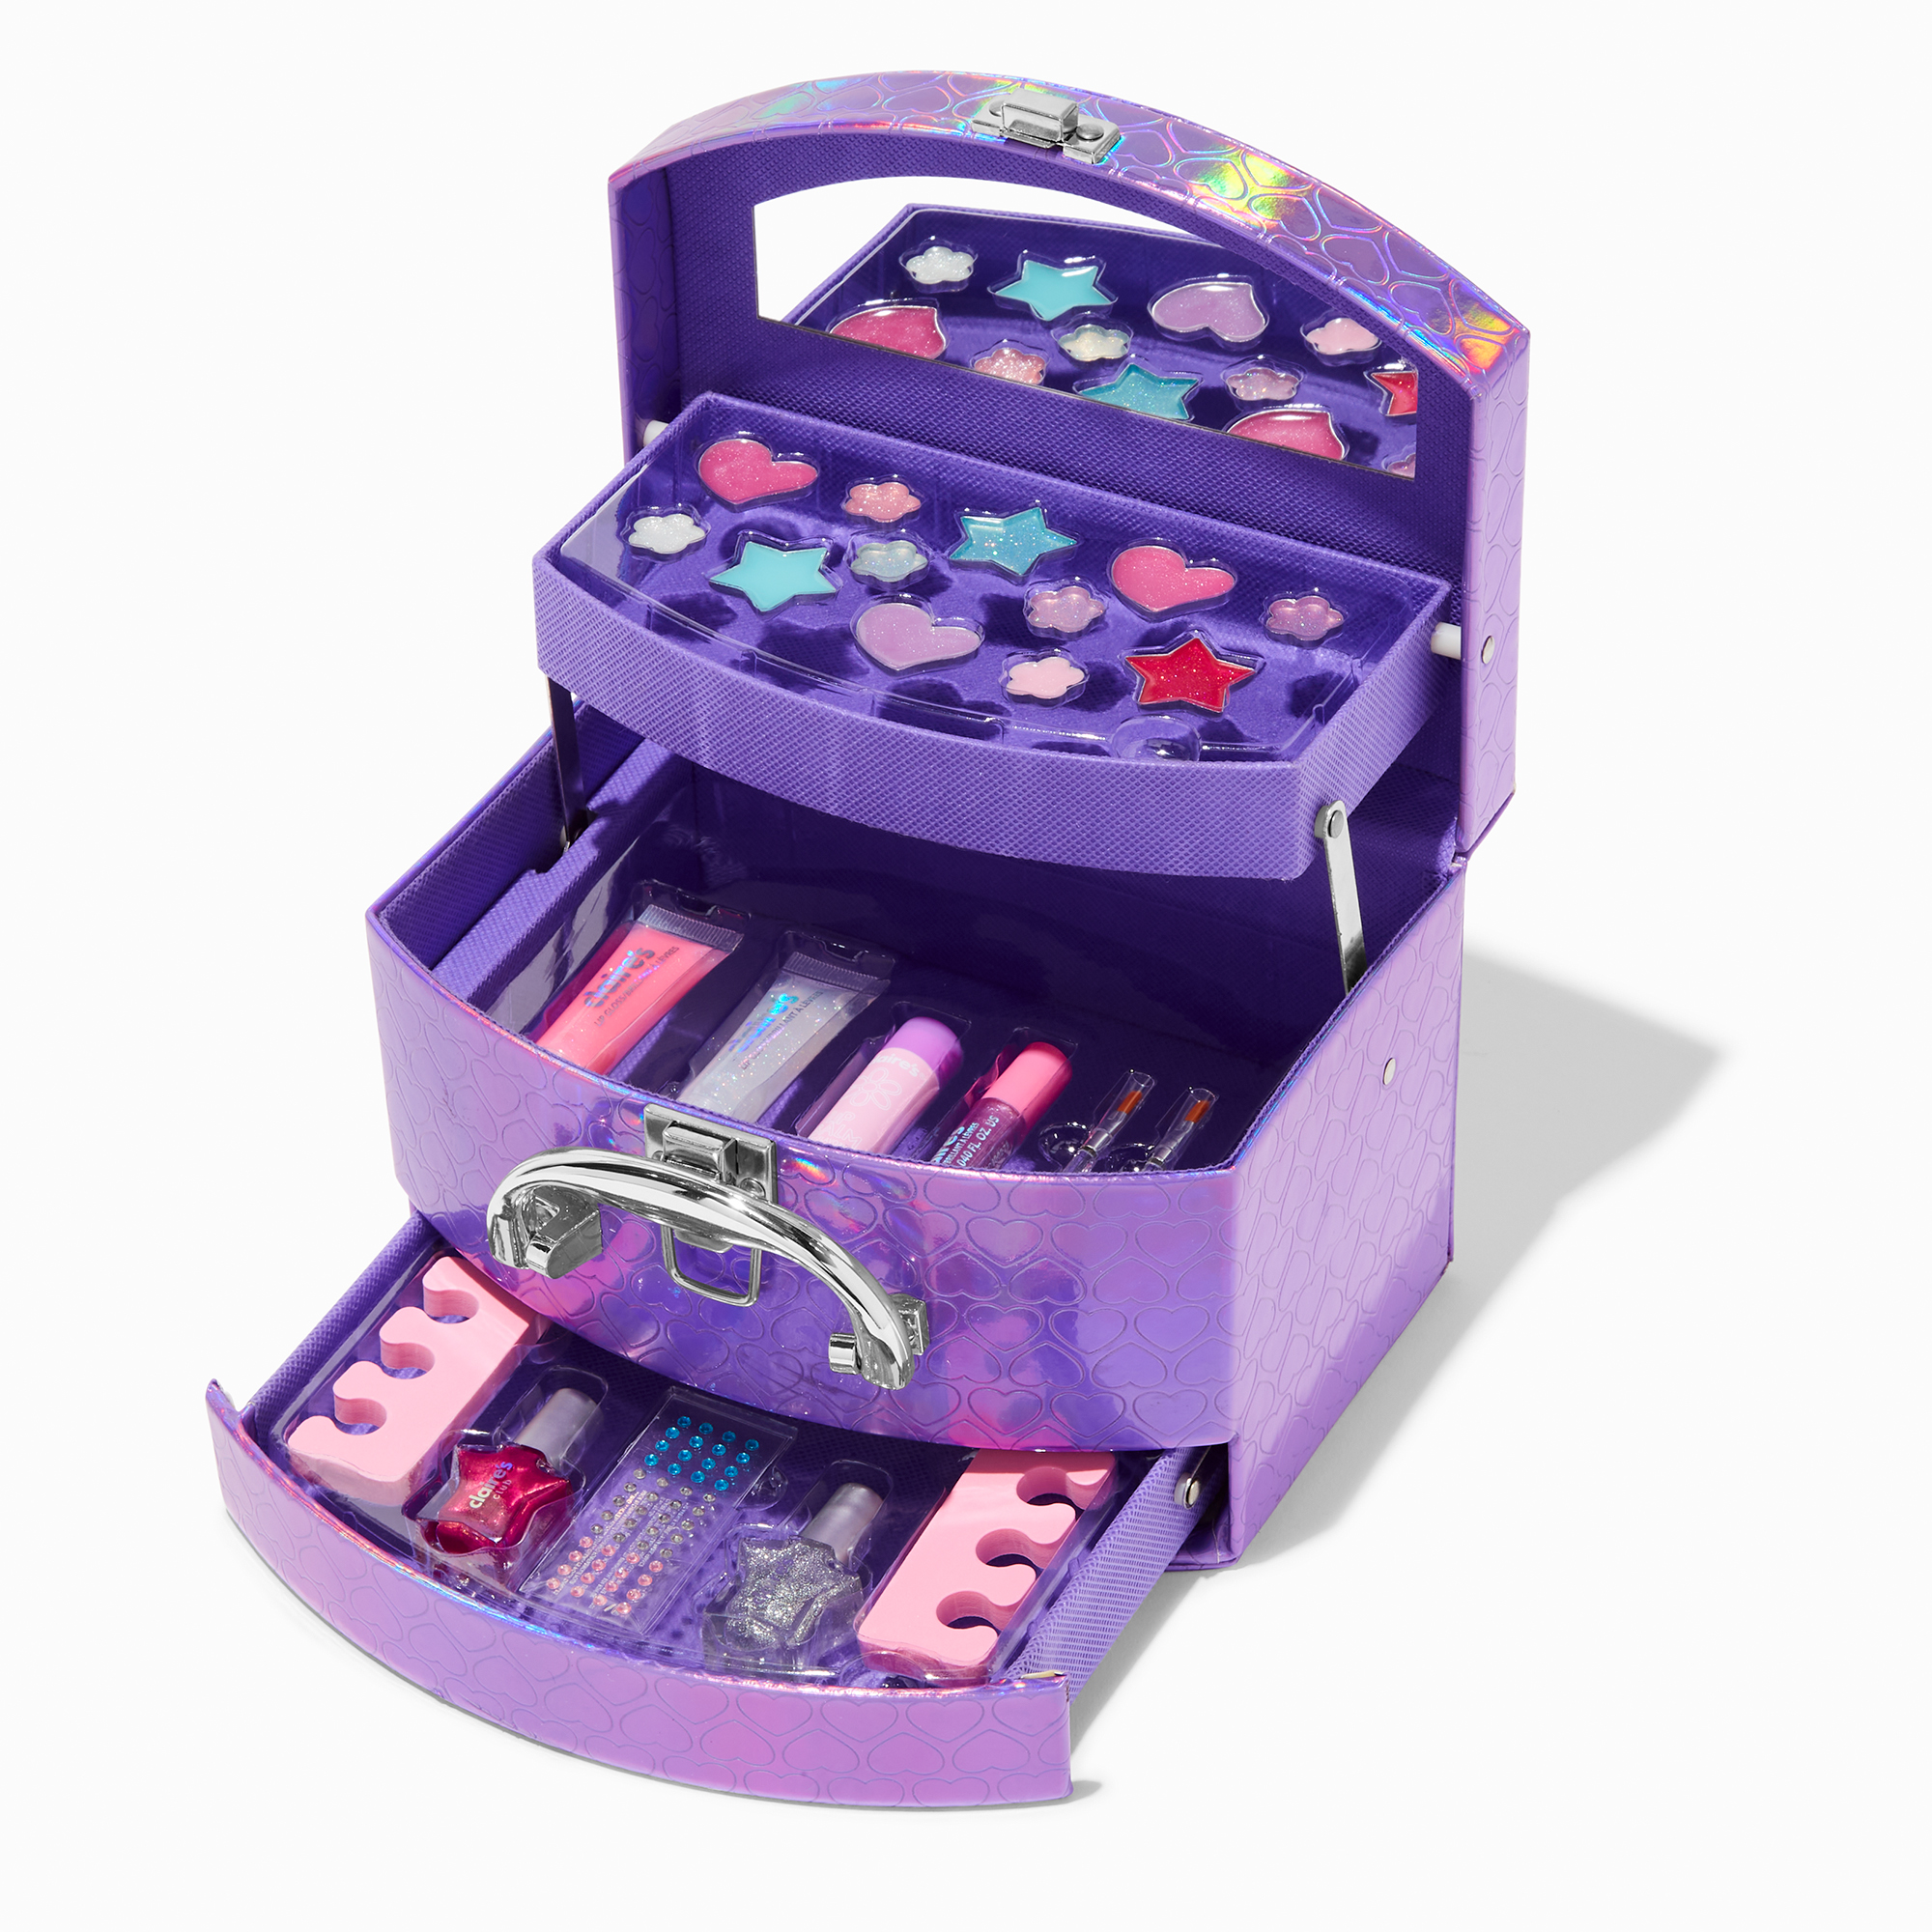 Beauty and Makeup for Women, Girls and Kids, Claire's UK